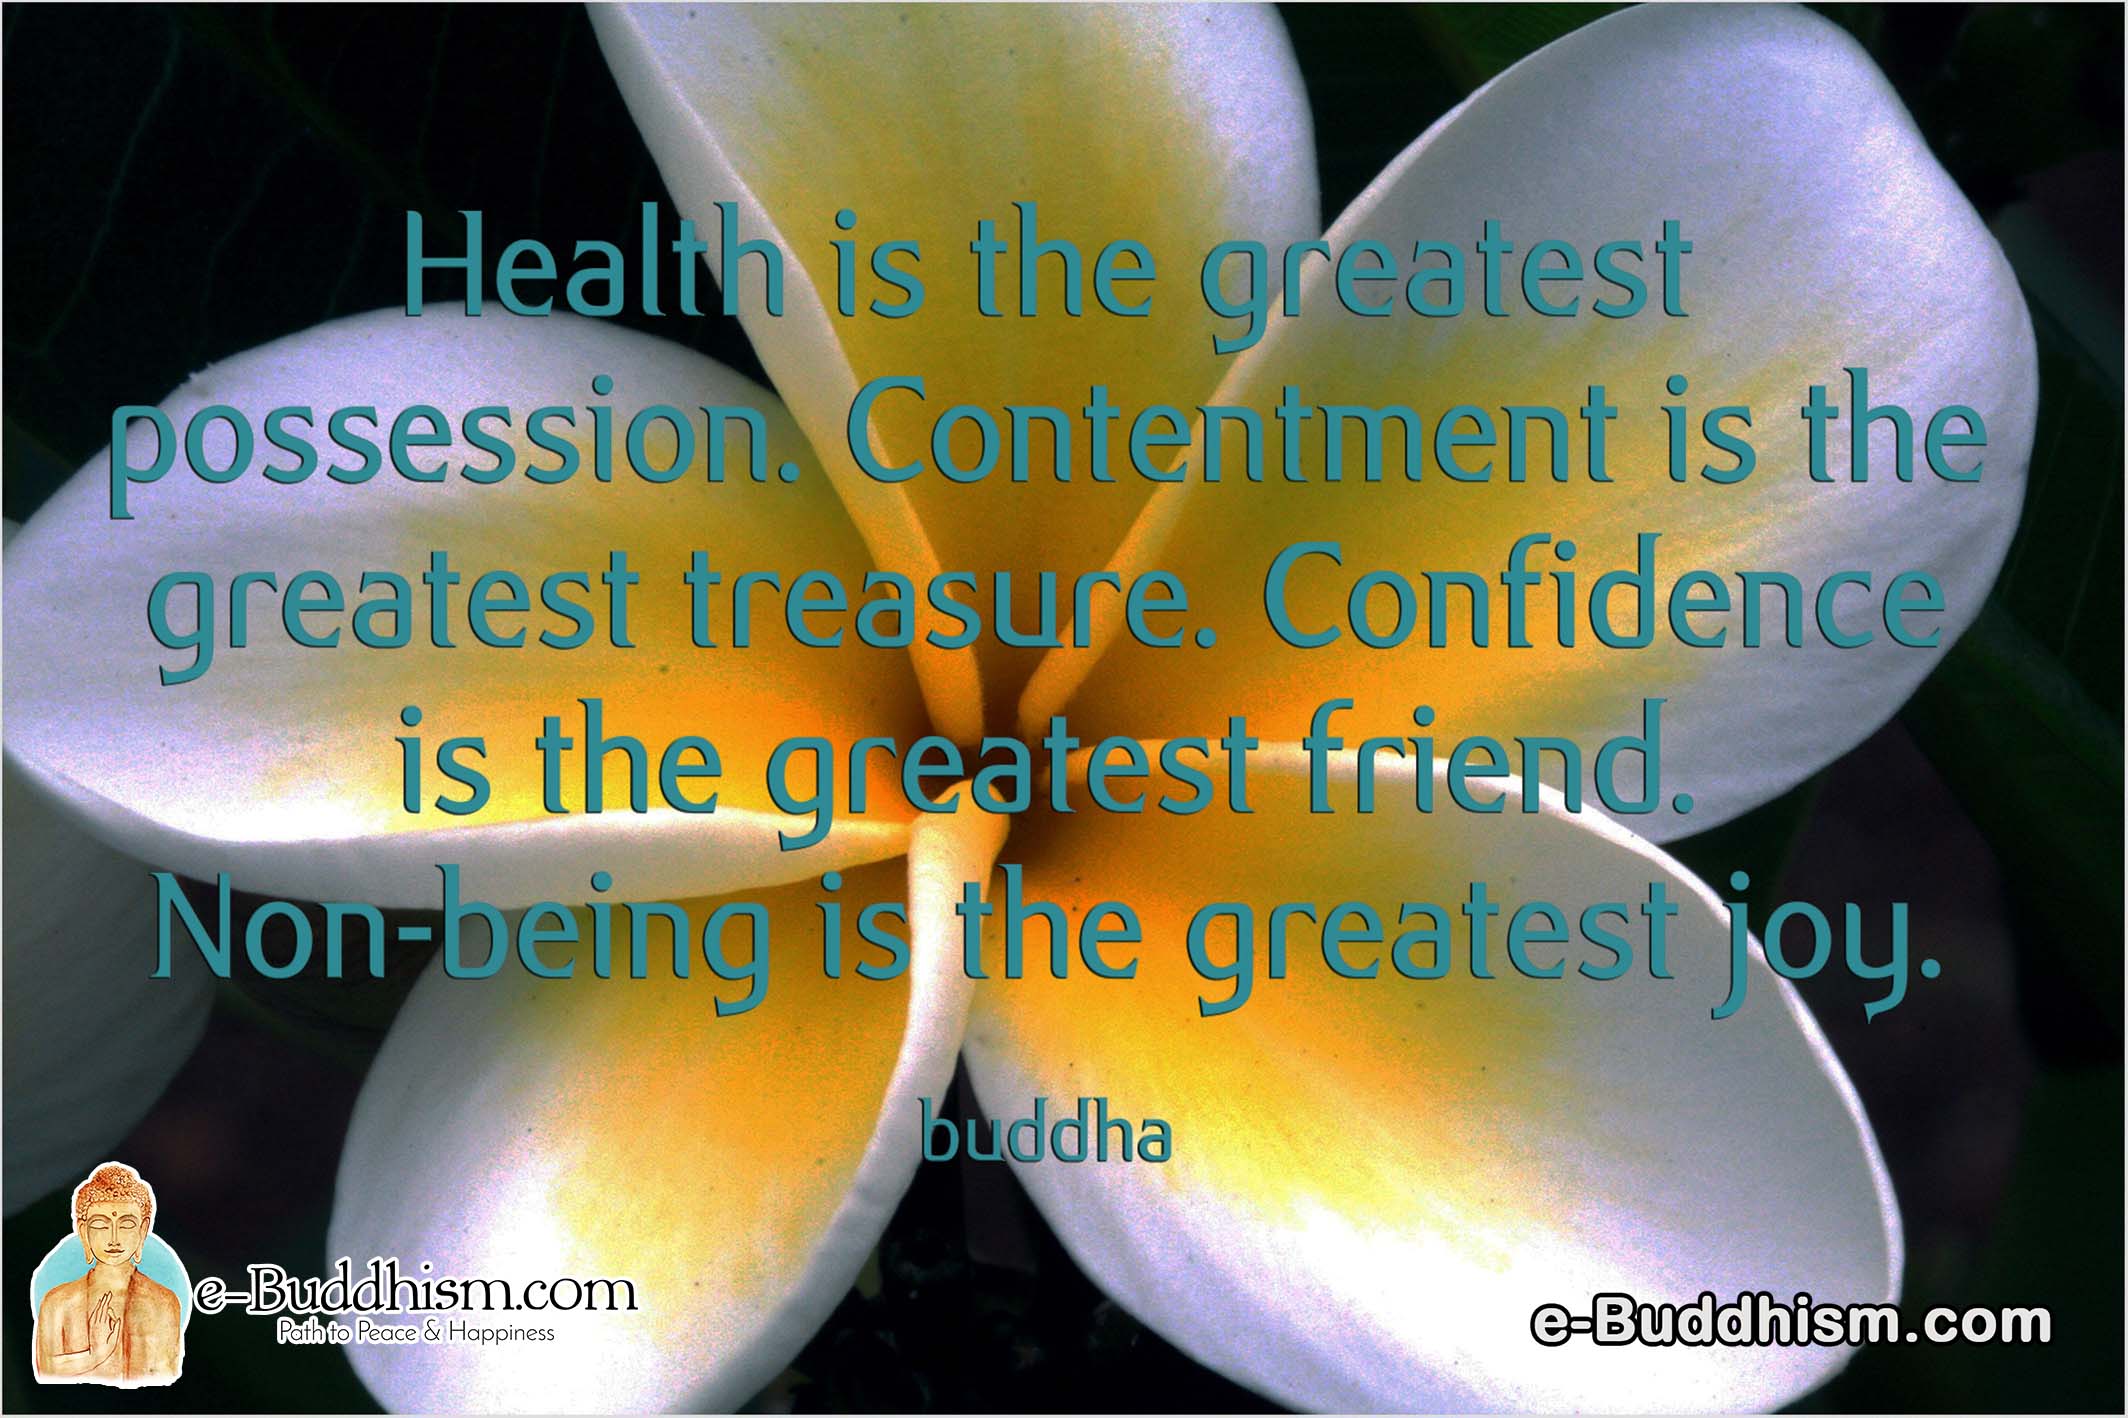 Health is the greatest possession. contentment is the greatest treasure. Confidence is the greatest friend. Non-being is the greatest joy. -Buddha